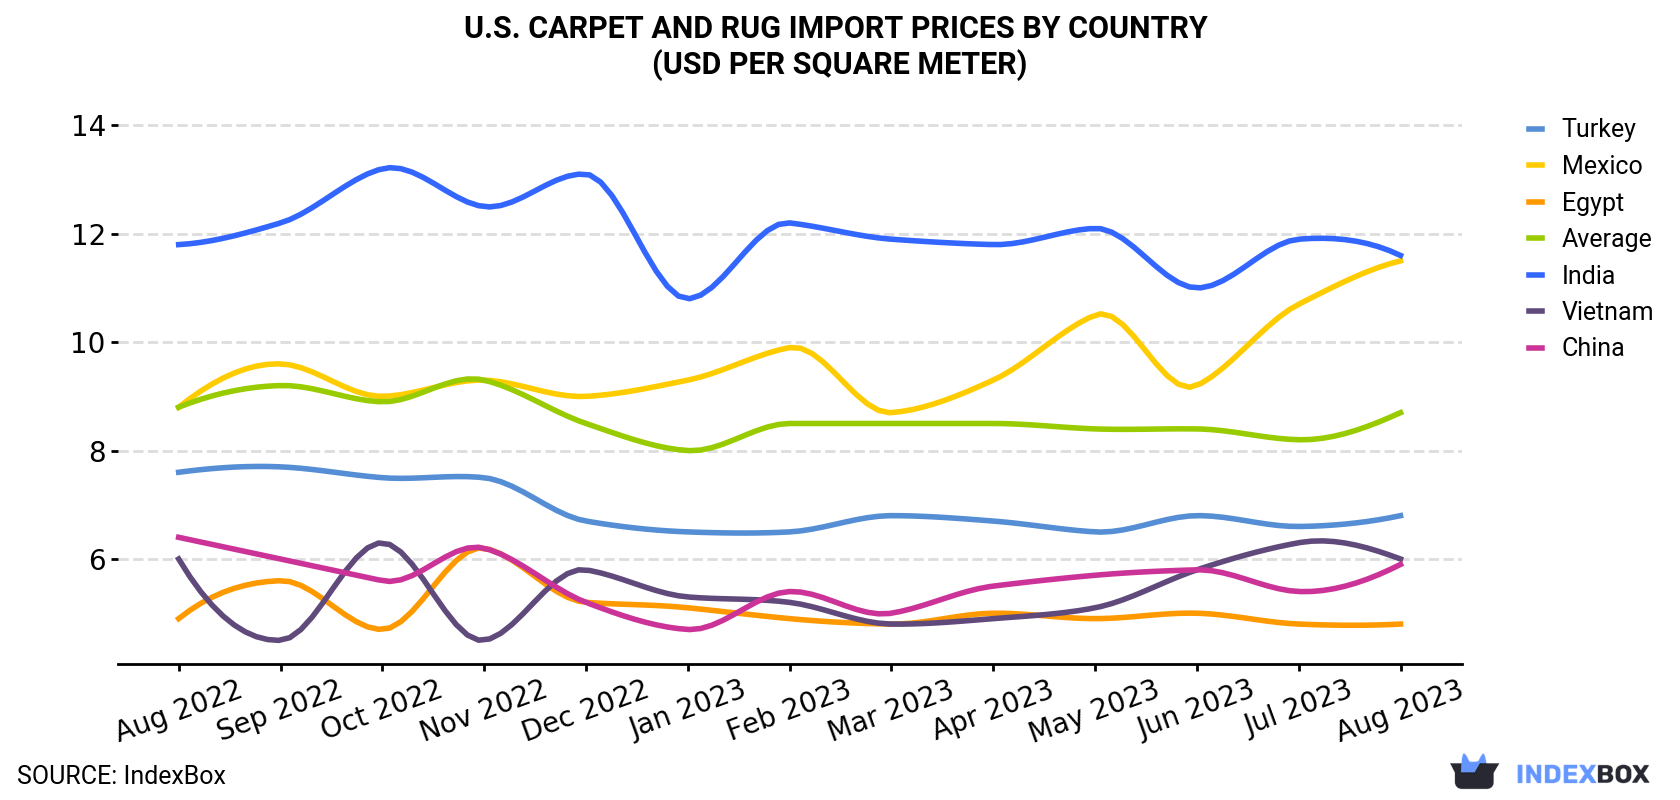 U.S. Carpet And Rug Import Prices By Country (USD Per Square Meter)